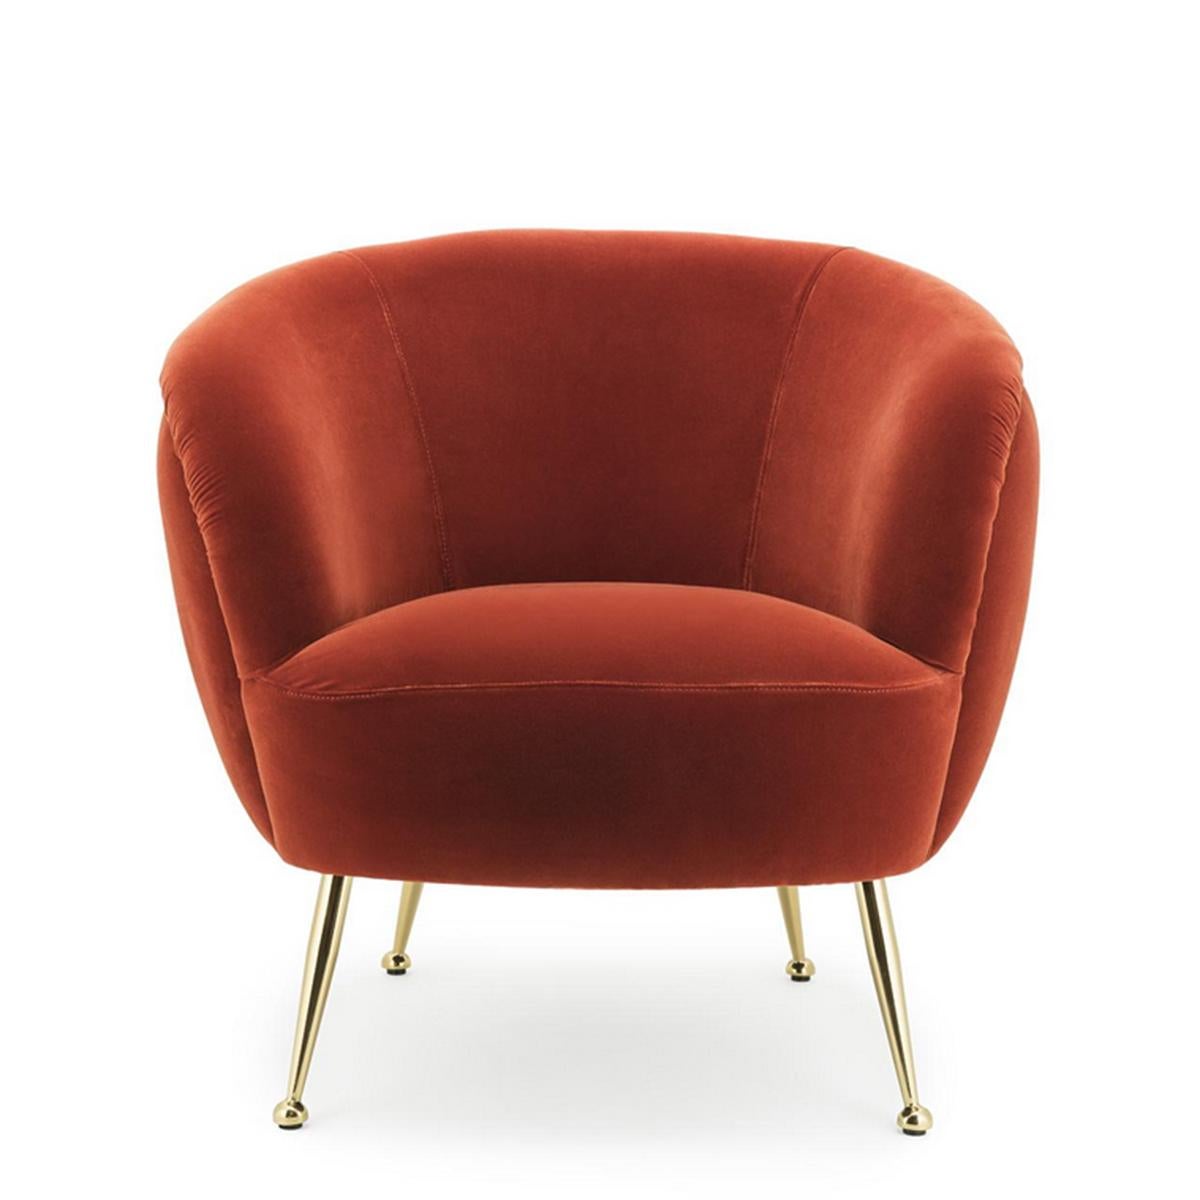 Armchair Fanny Coral with solid wood structure,
upholstered and coverd with velvet fabric in coral orange
color. With polished brass feet.